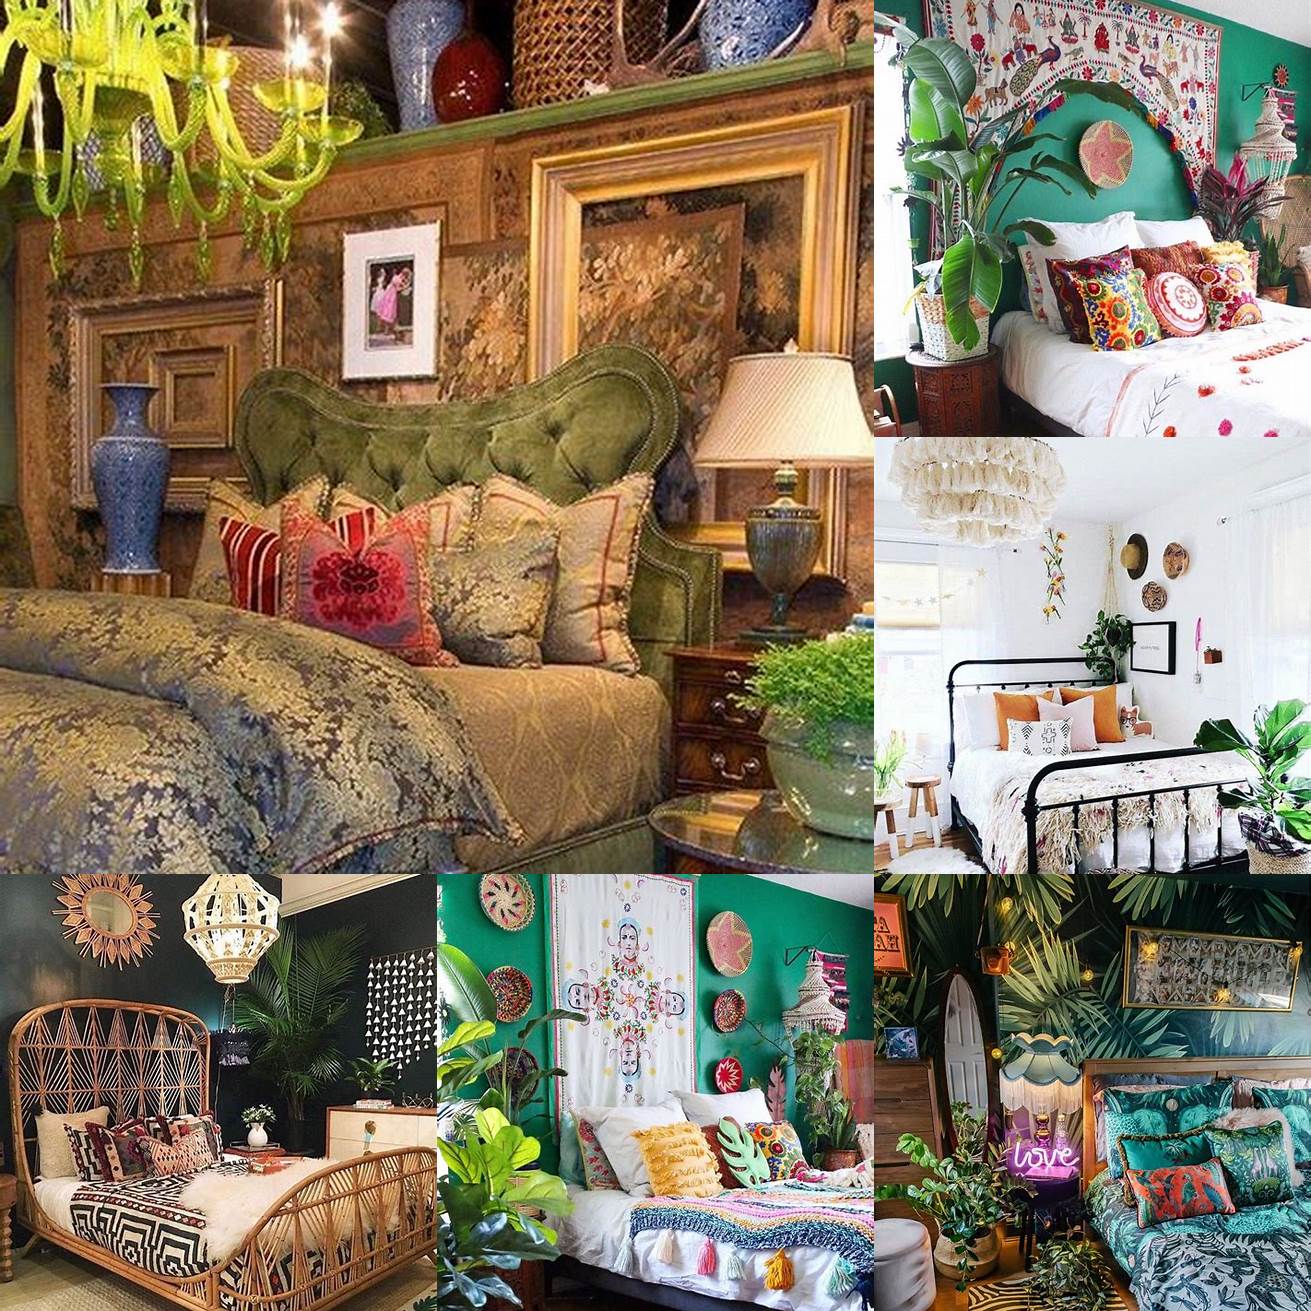 A bohemian bedroom is perfect for those who love to express their individuality and creativity The bold colors and eclectic patterns create a fun and playful atmosphere that is sure to inspire